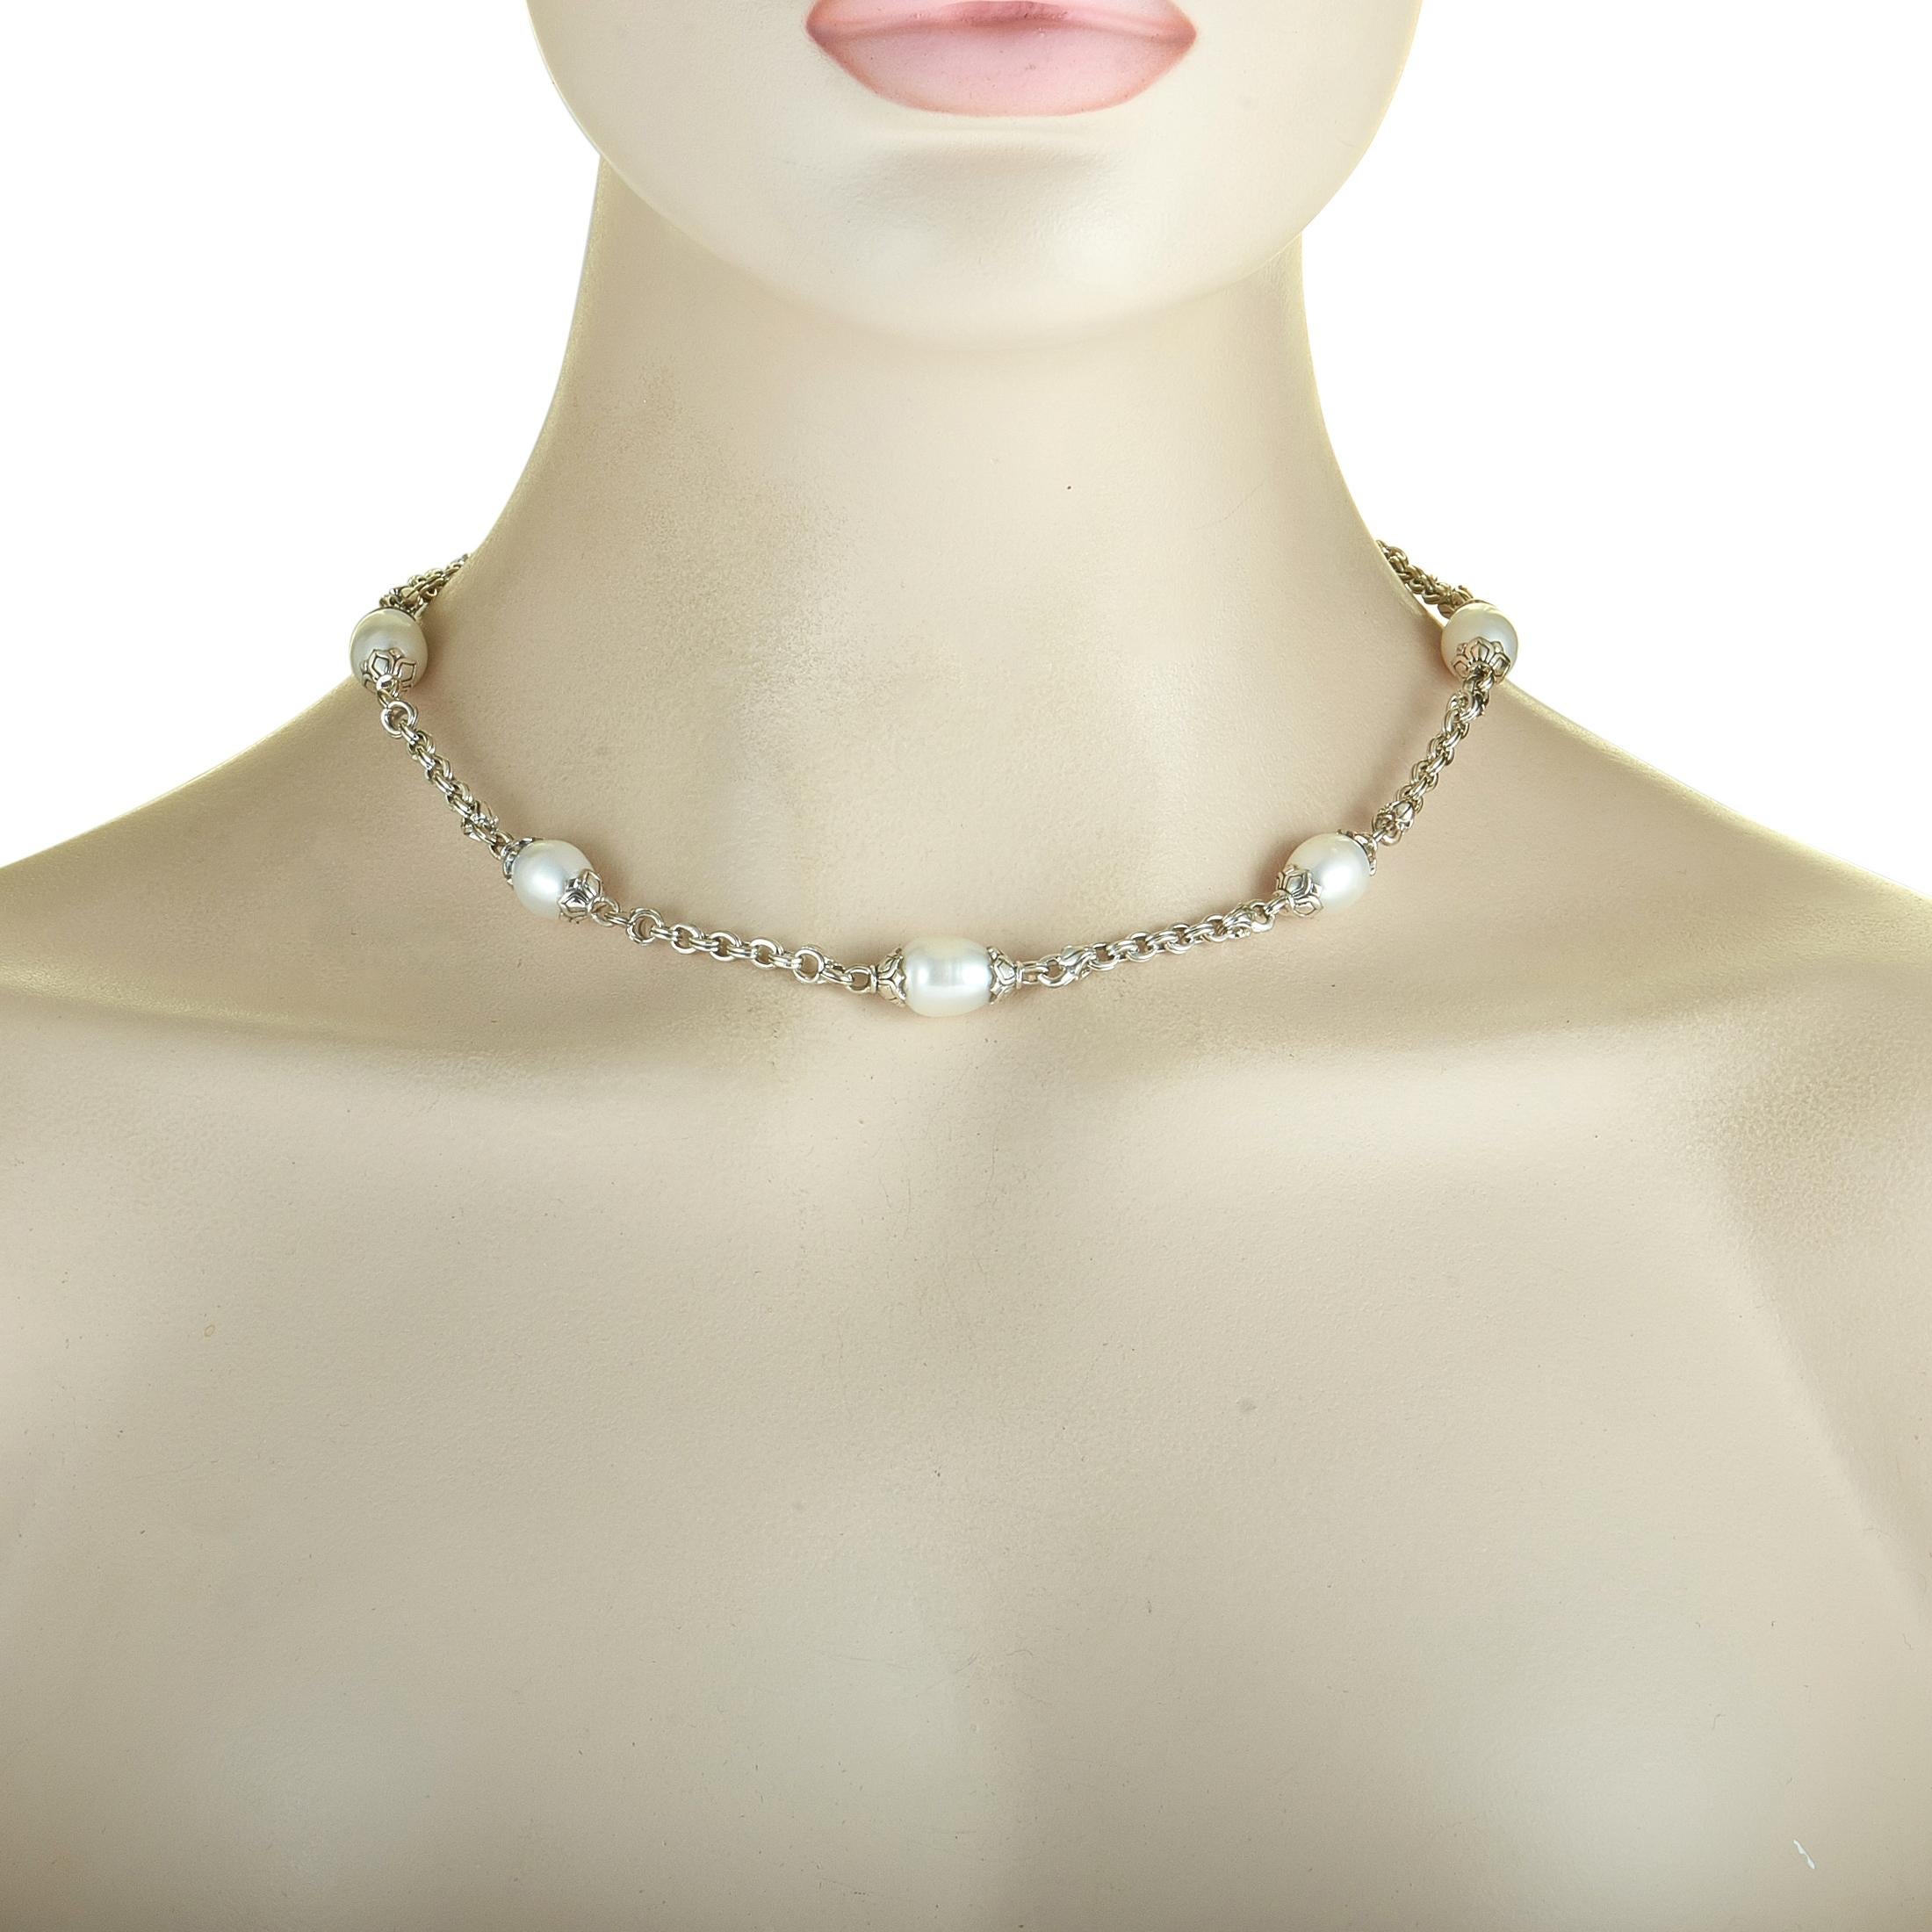 This Scott Kay necklace is crafted from sterling silver and embellished with pearls. The necklace weighs 45.8 grams and measures 17” in length.

Offered in brand new condition, this jewelry piece includes a gift box.